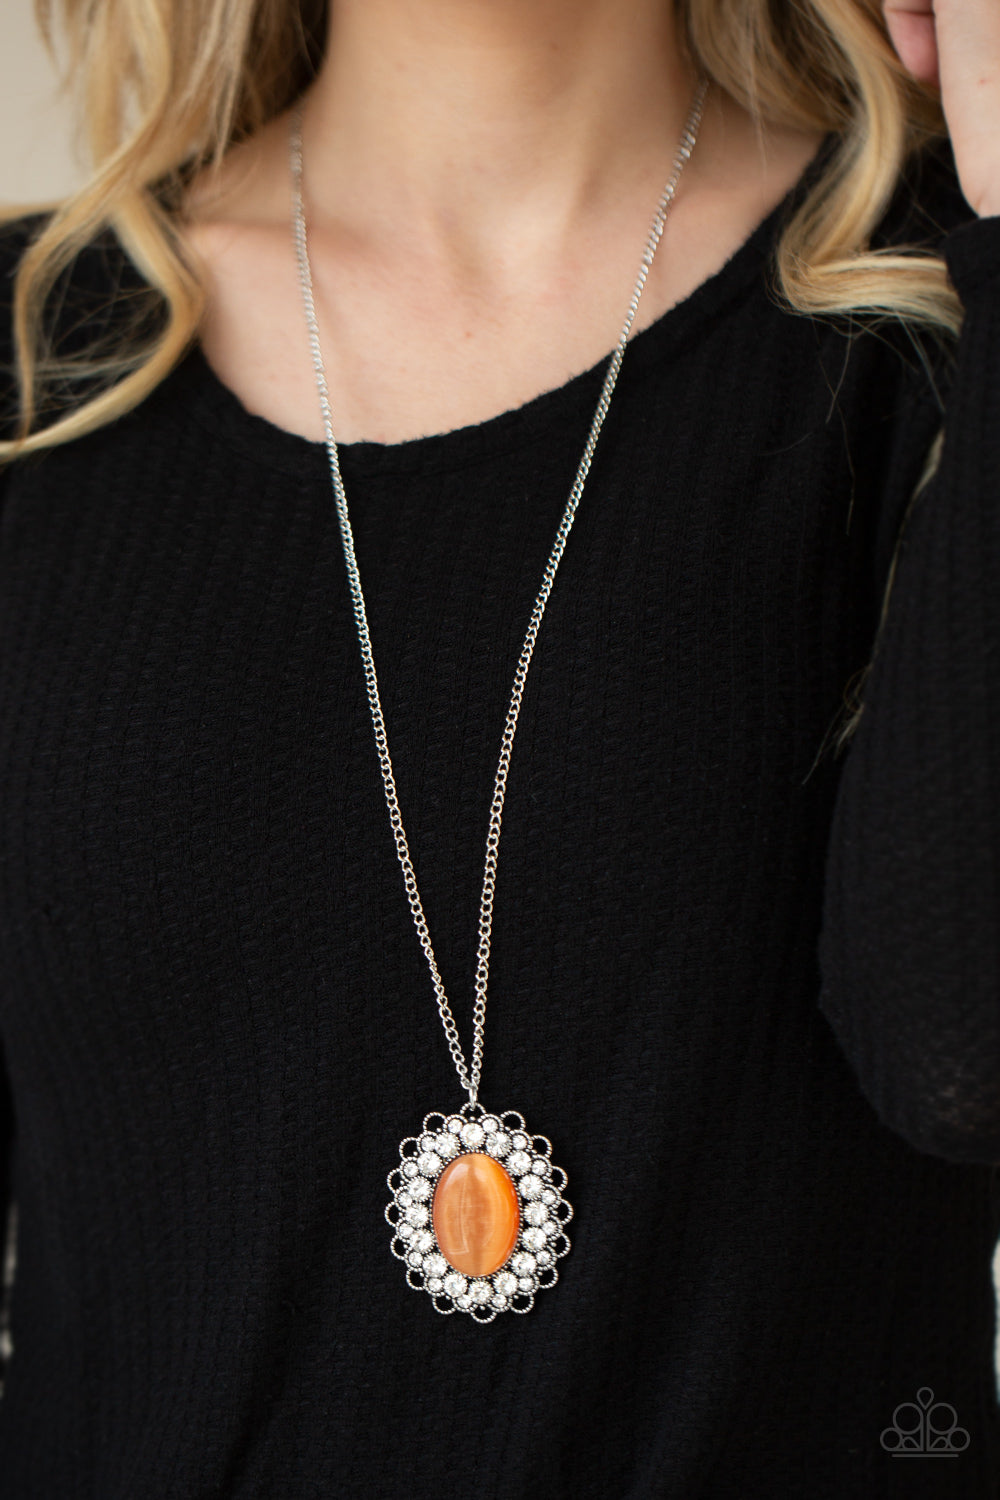 Paparazzi Accessories Oh My Medallion - Orange Necklace & Earrings 